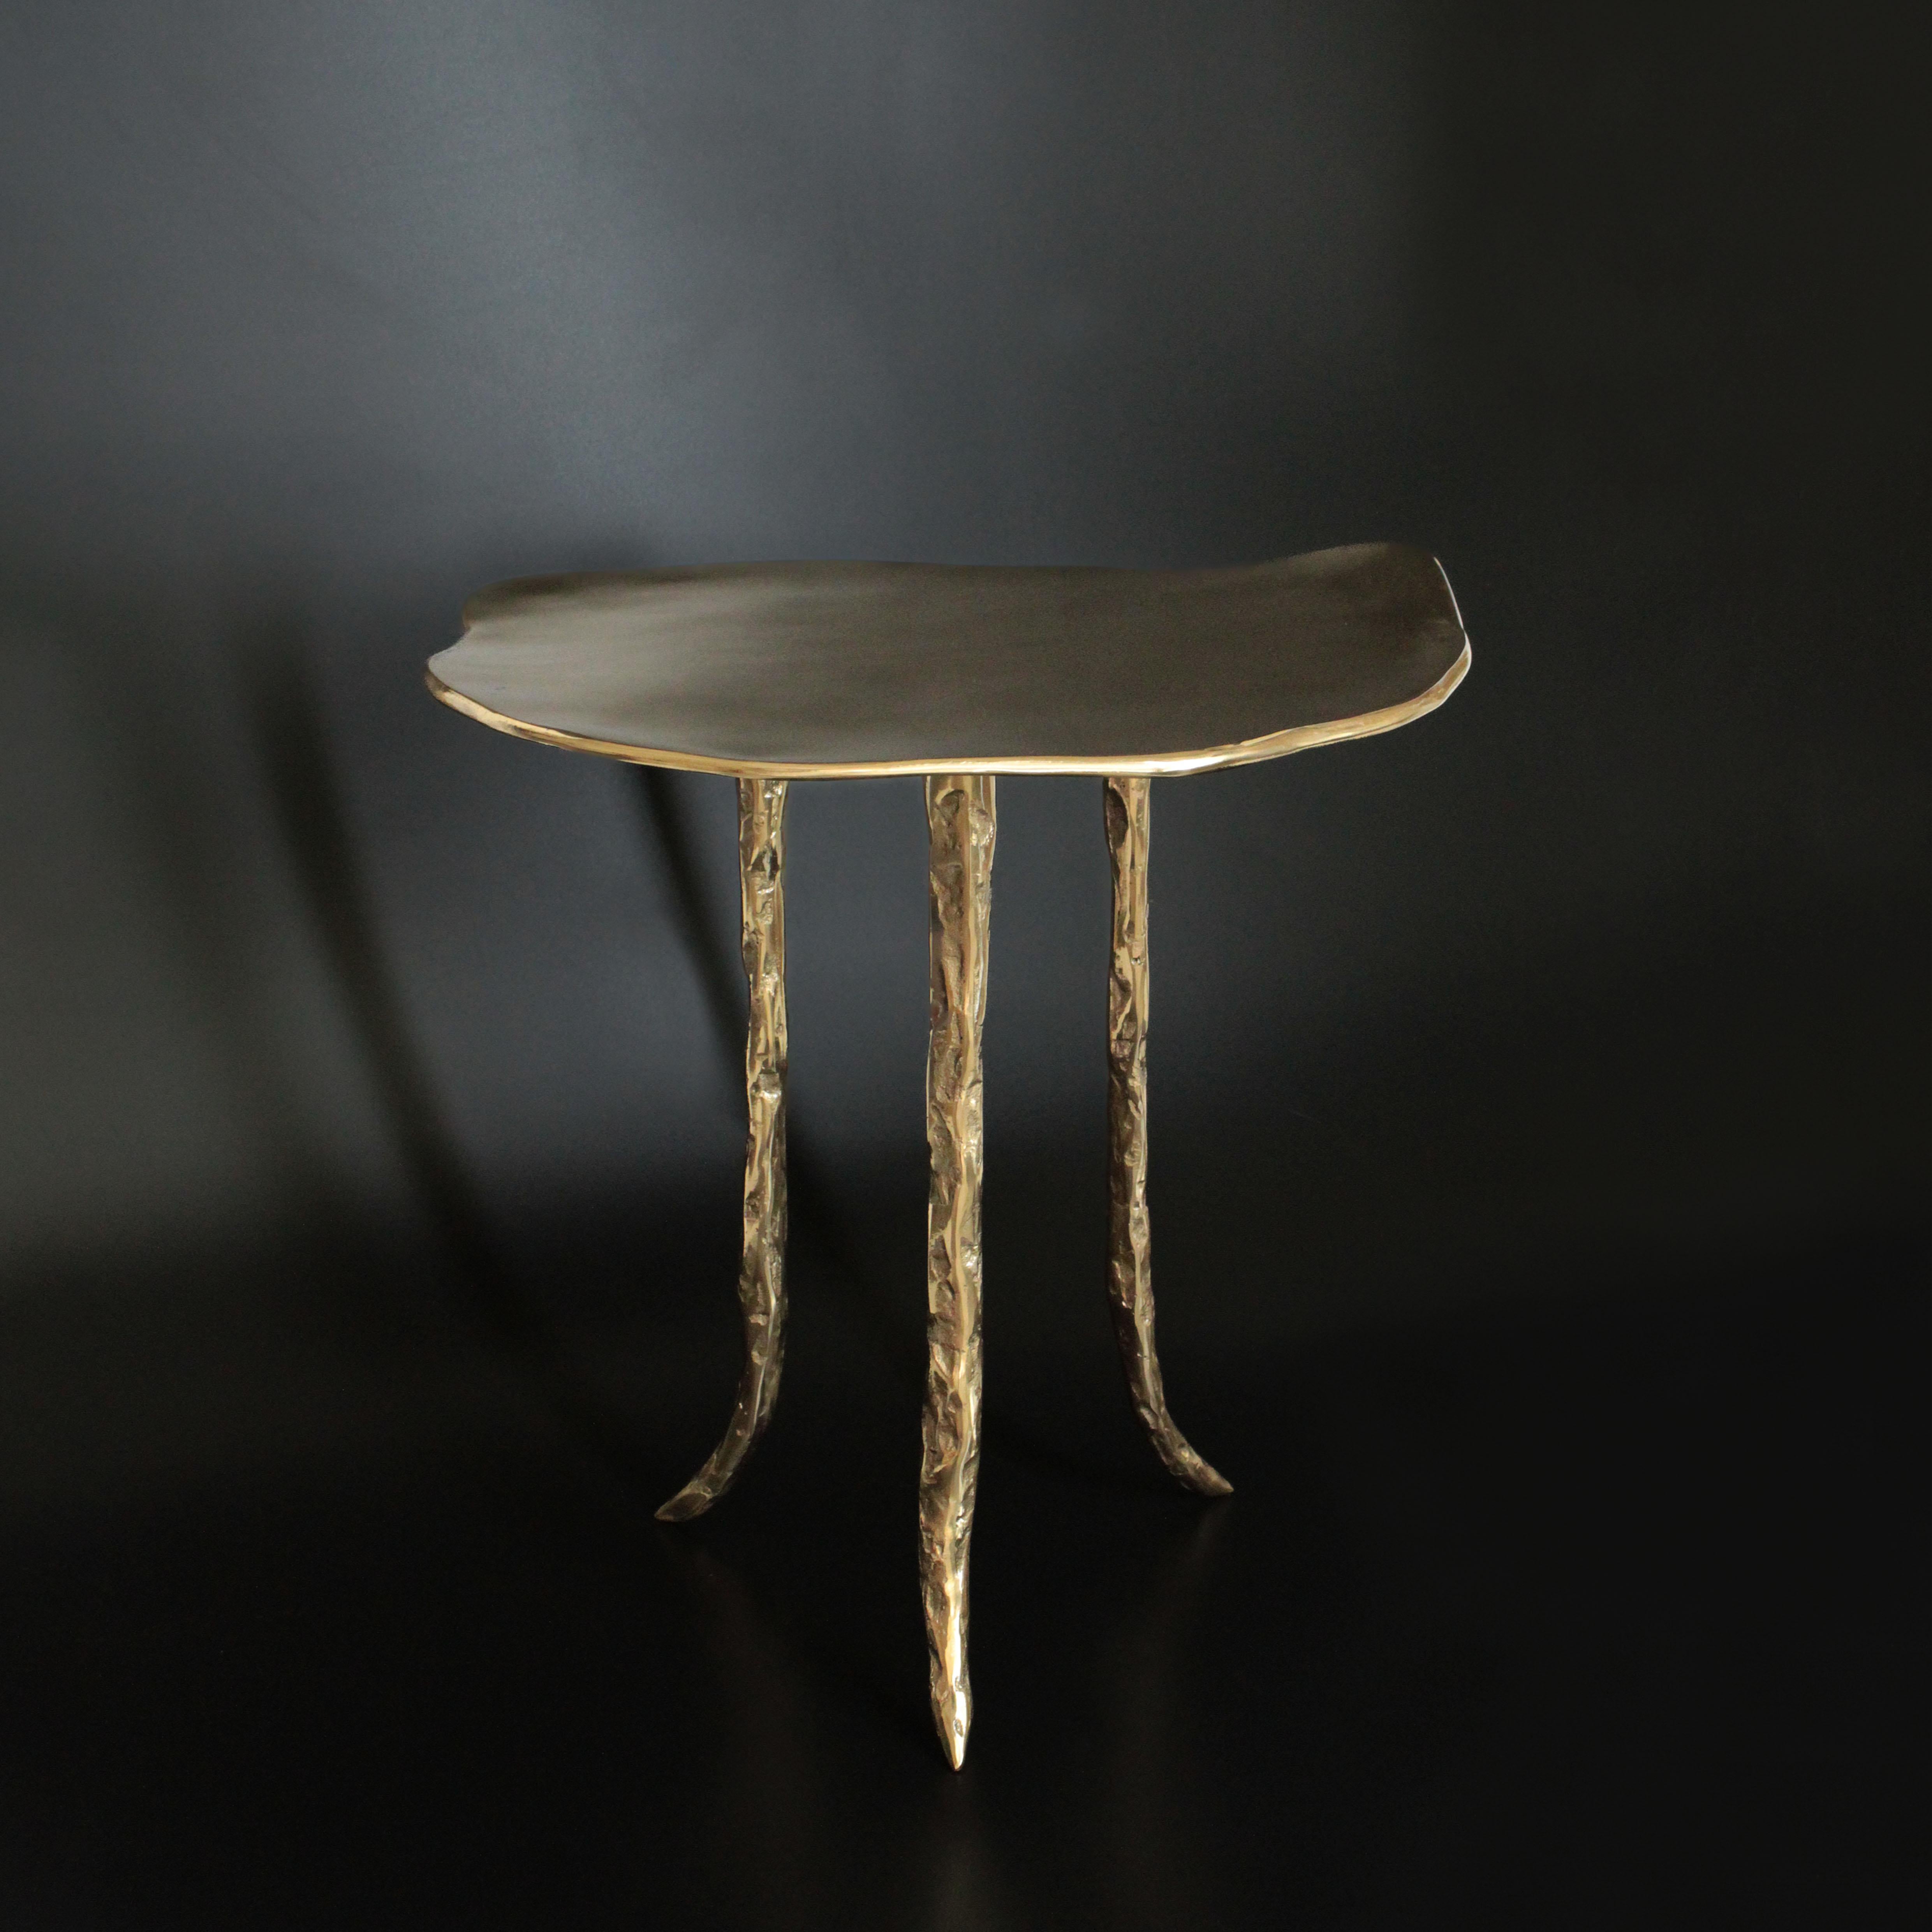 Curved and sculptural side tables,
Which draw attention at first glance, compliment the bronze material and reveal the potential of the bronze material with its fluid and silky appearance.

Designed with quality and sturdiness in mind, 
We produce